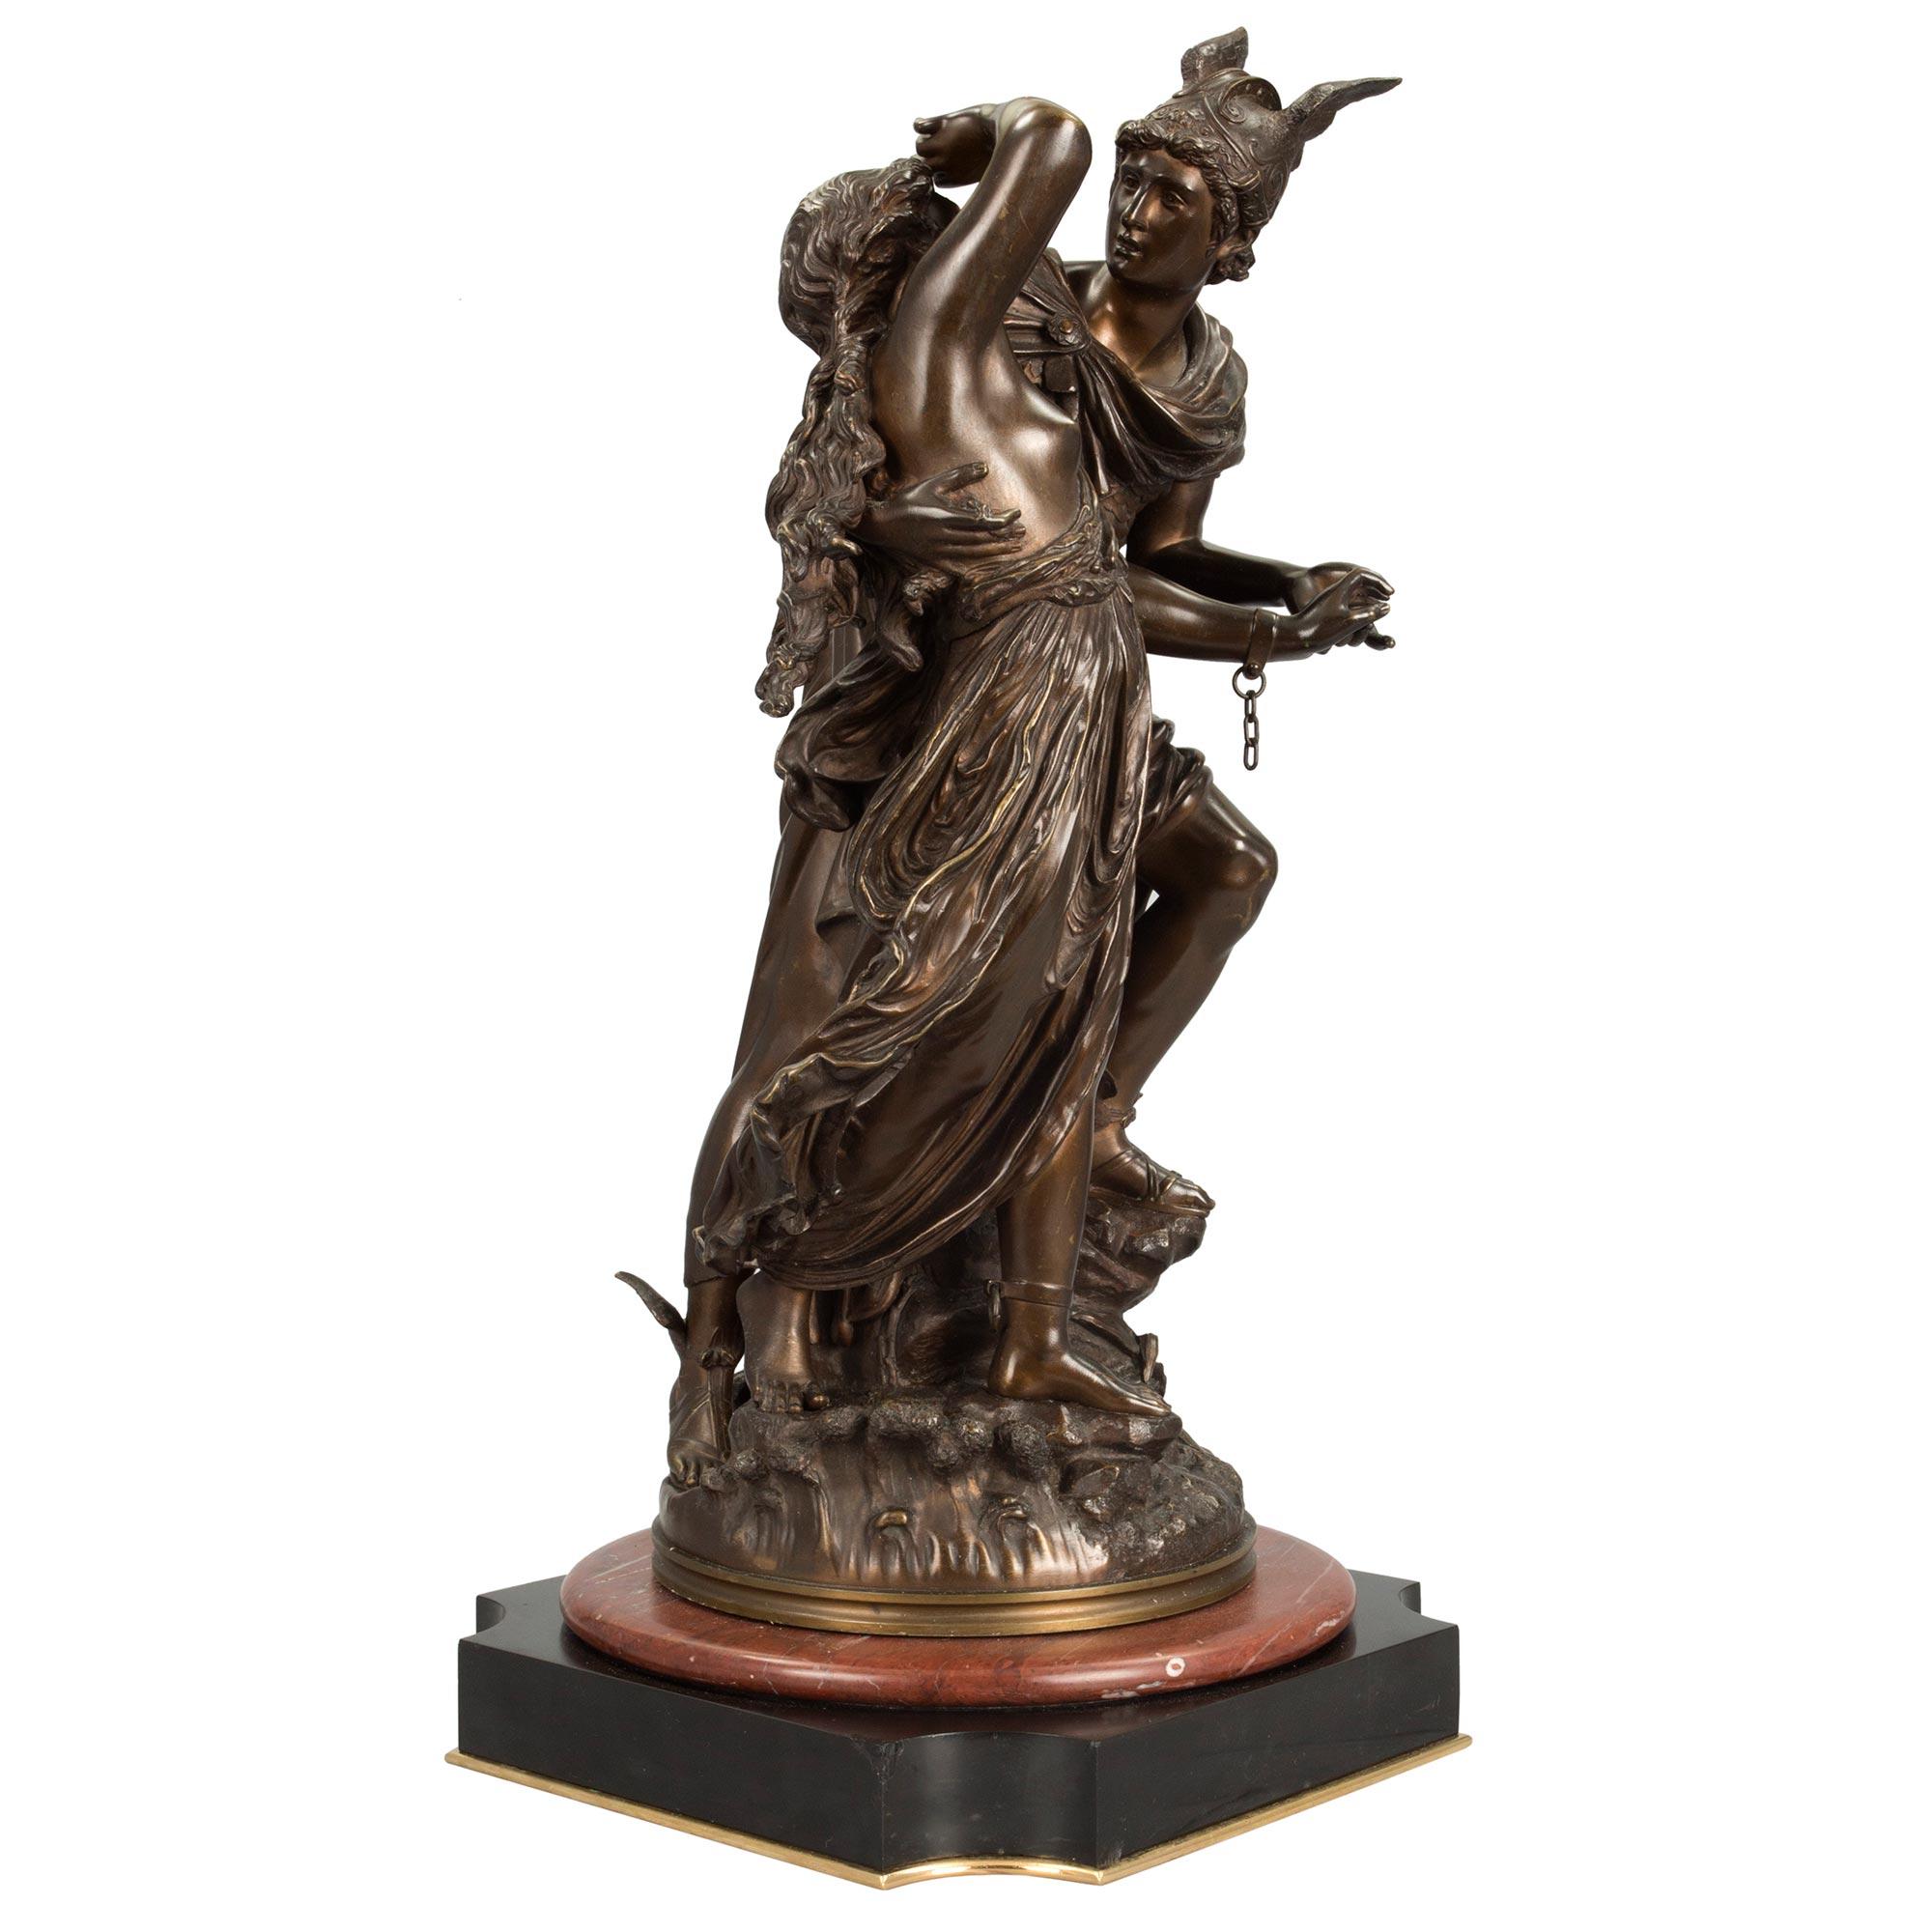 A beautiful and high quality French 19th century Louis XVI st. patinated bronze of the Rescue of Andromeda signed L. Gregoire. This striking bronze portrays Perseus, who was provided with the winged sandals of Hermes so that he could fly and the